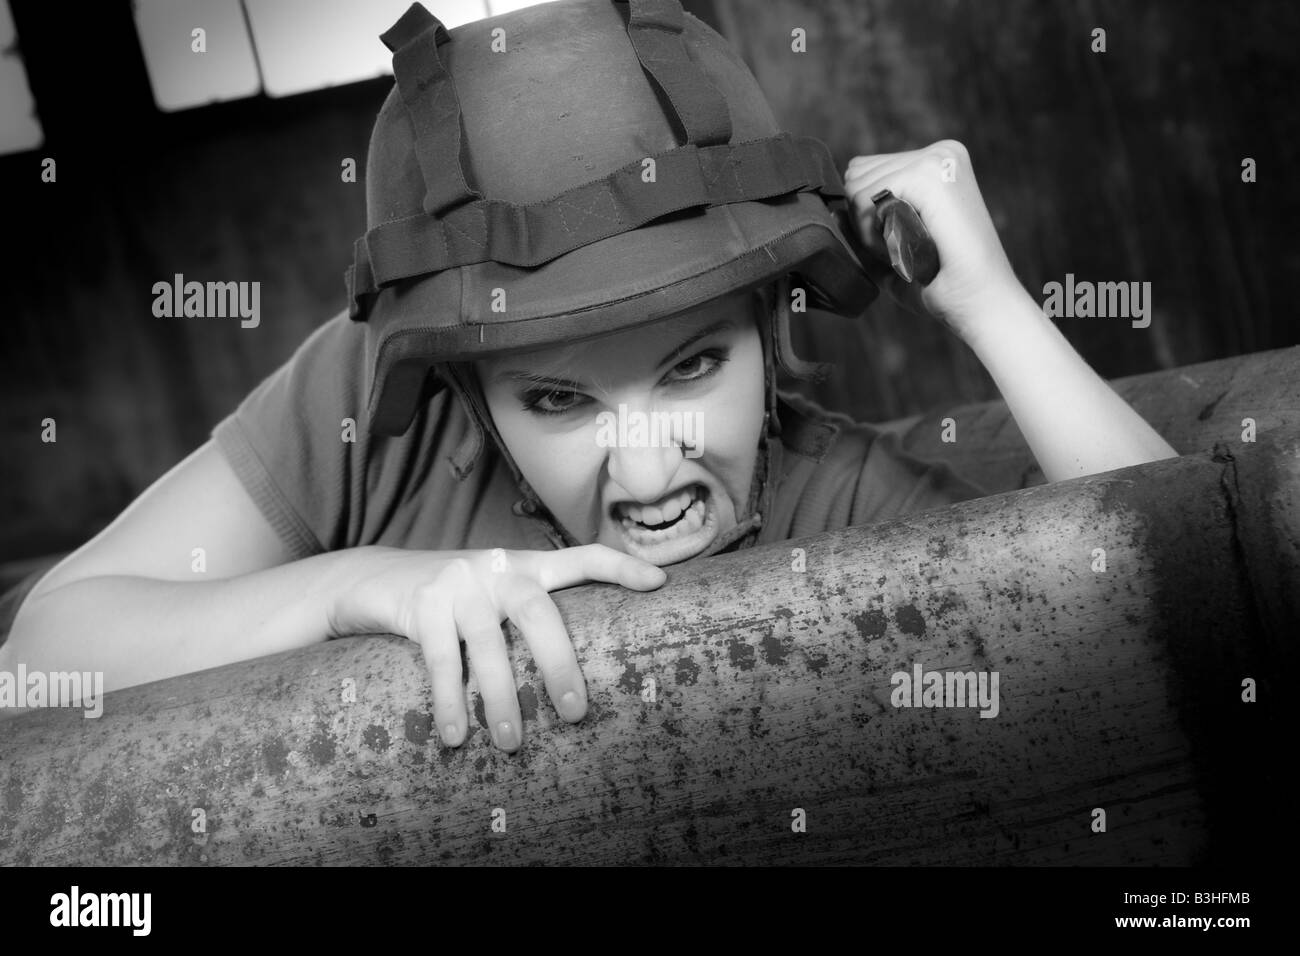 army woman attacking with knife Stock Photo